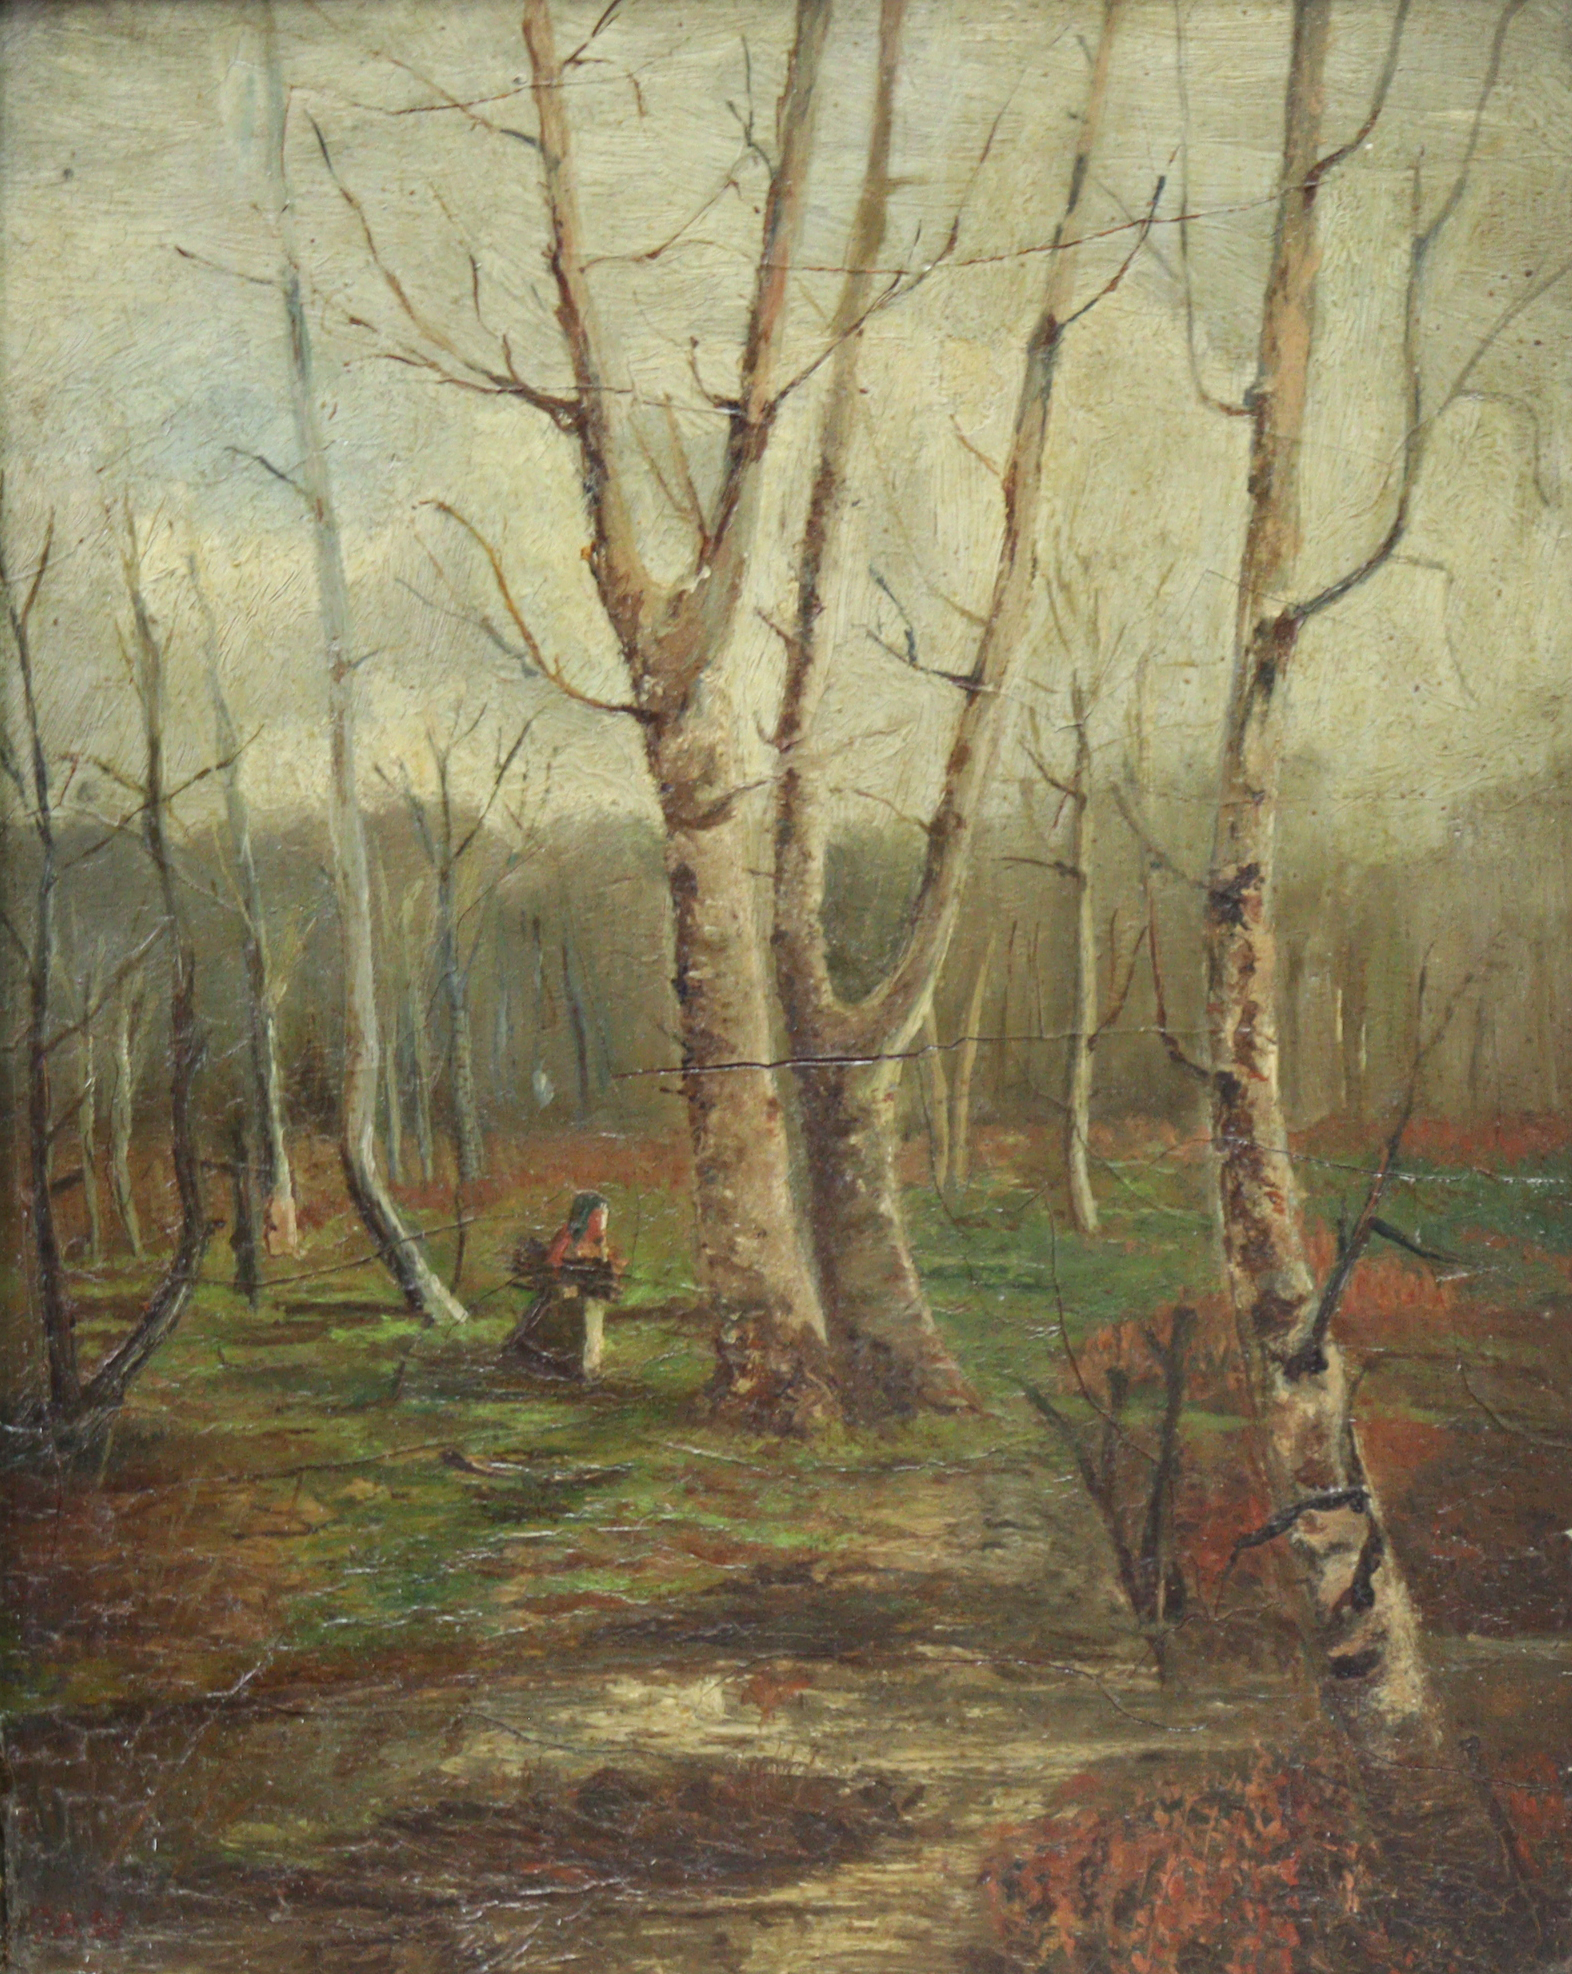 ENGLISH SCHOOL, 19th century. A wooded landscape with figure gathering firewood, Oil on panel: